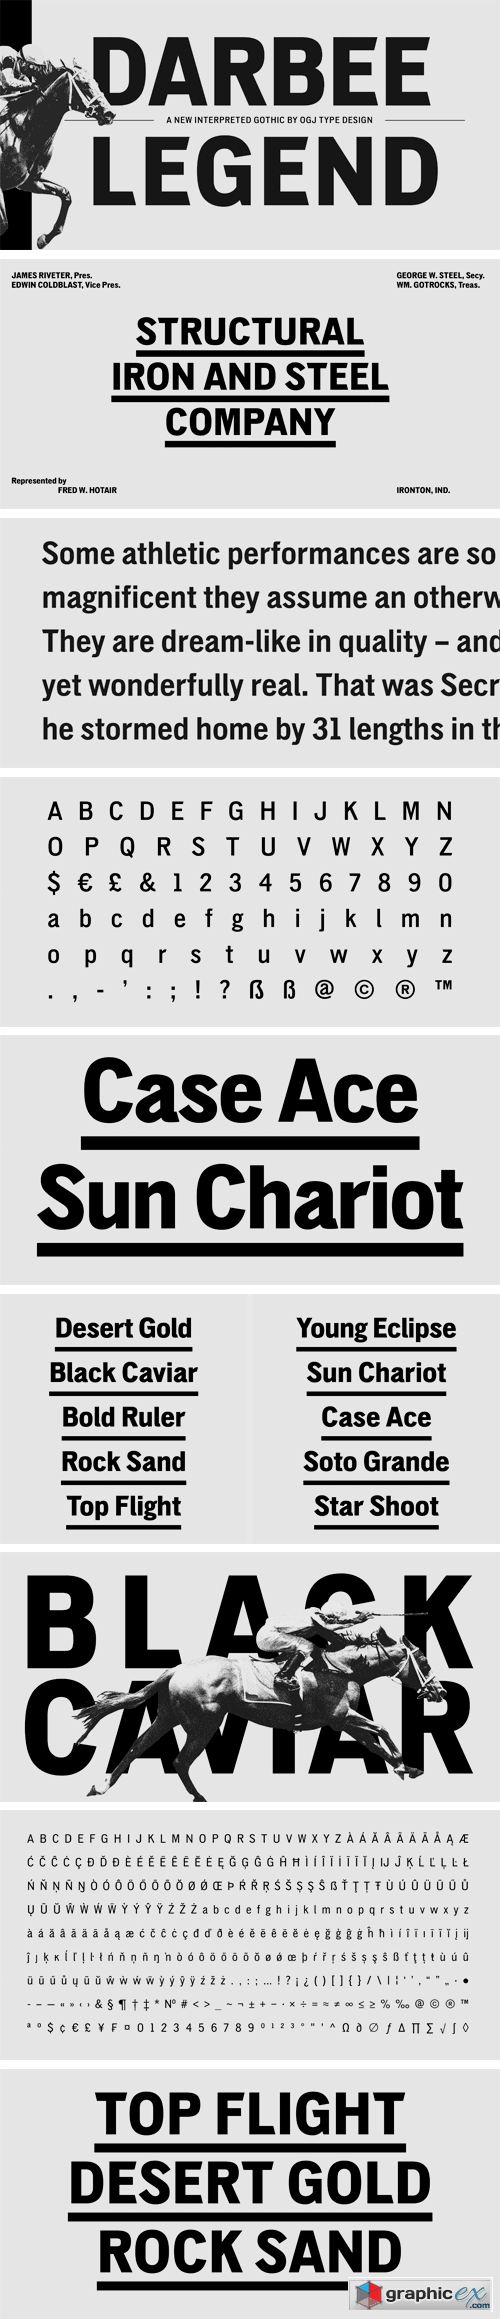 Darbee Legend Font Family